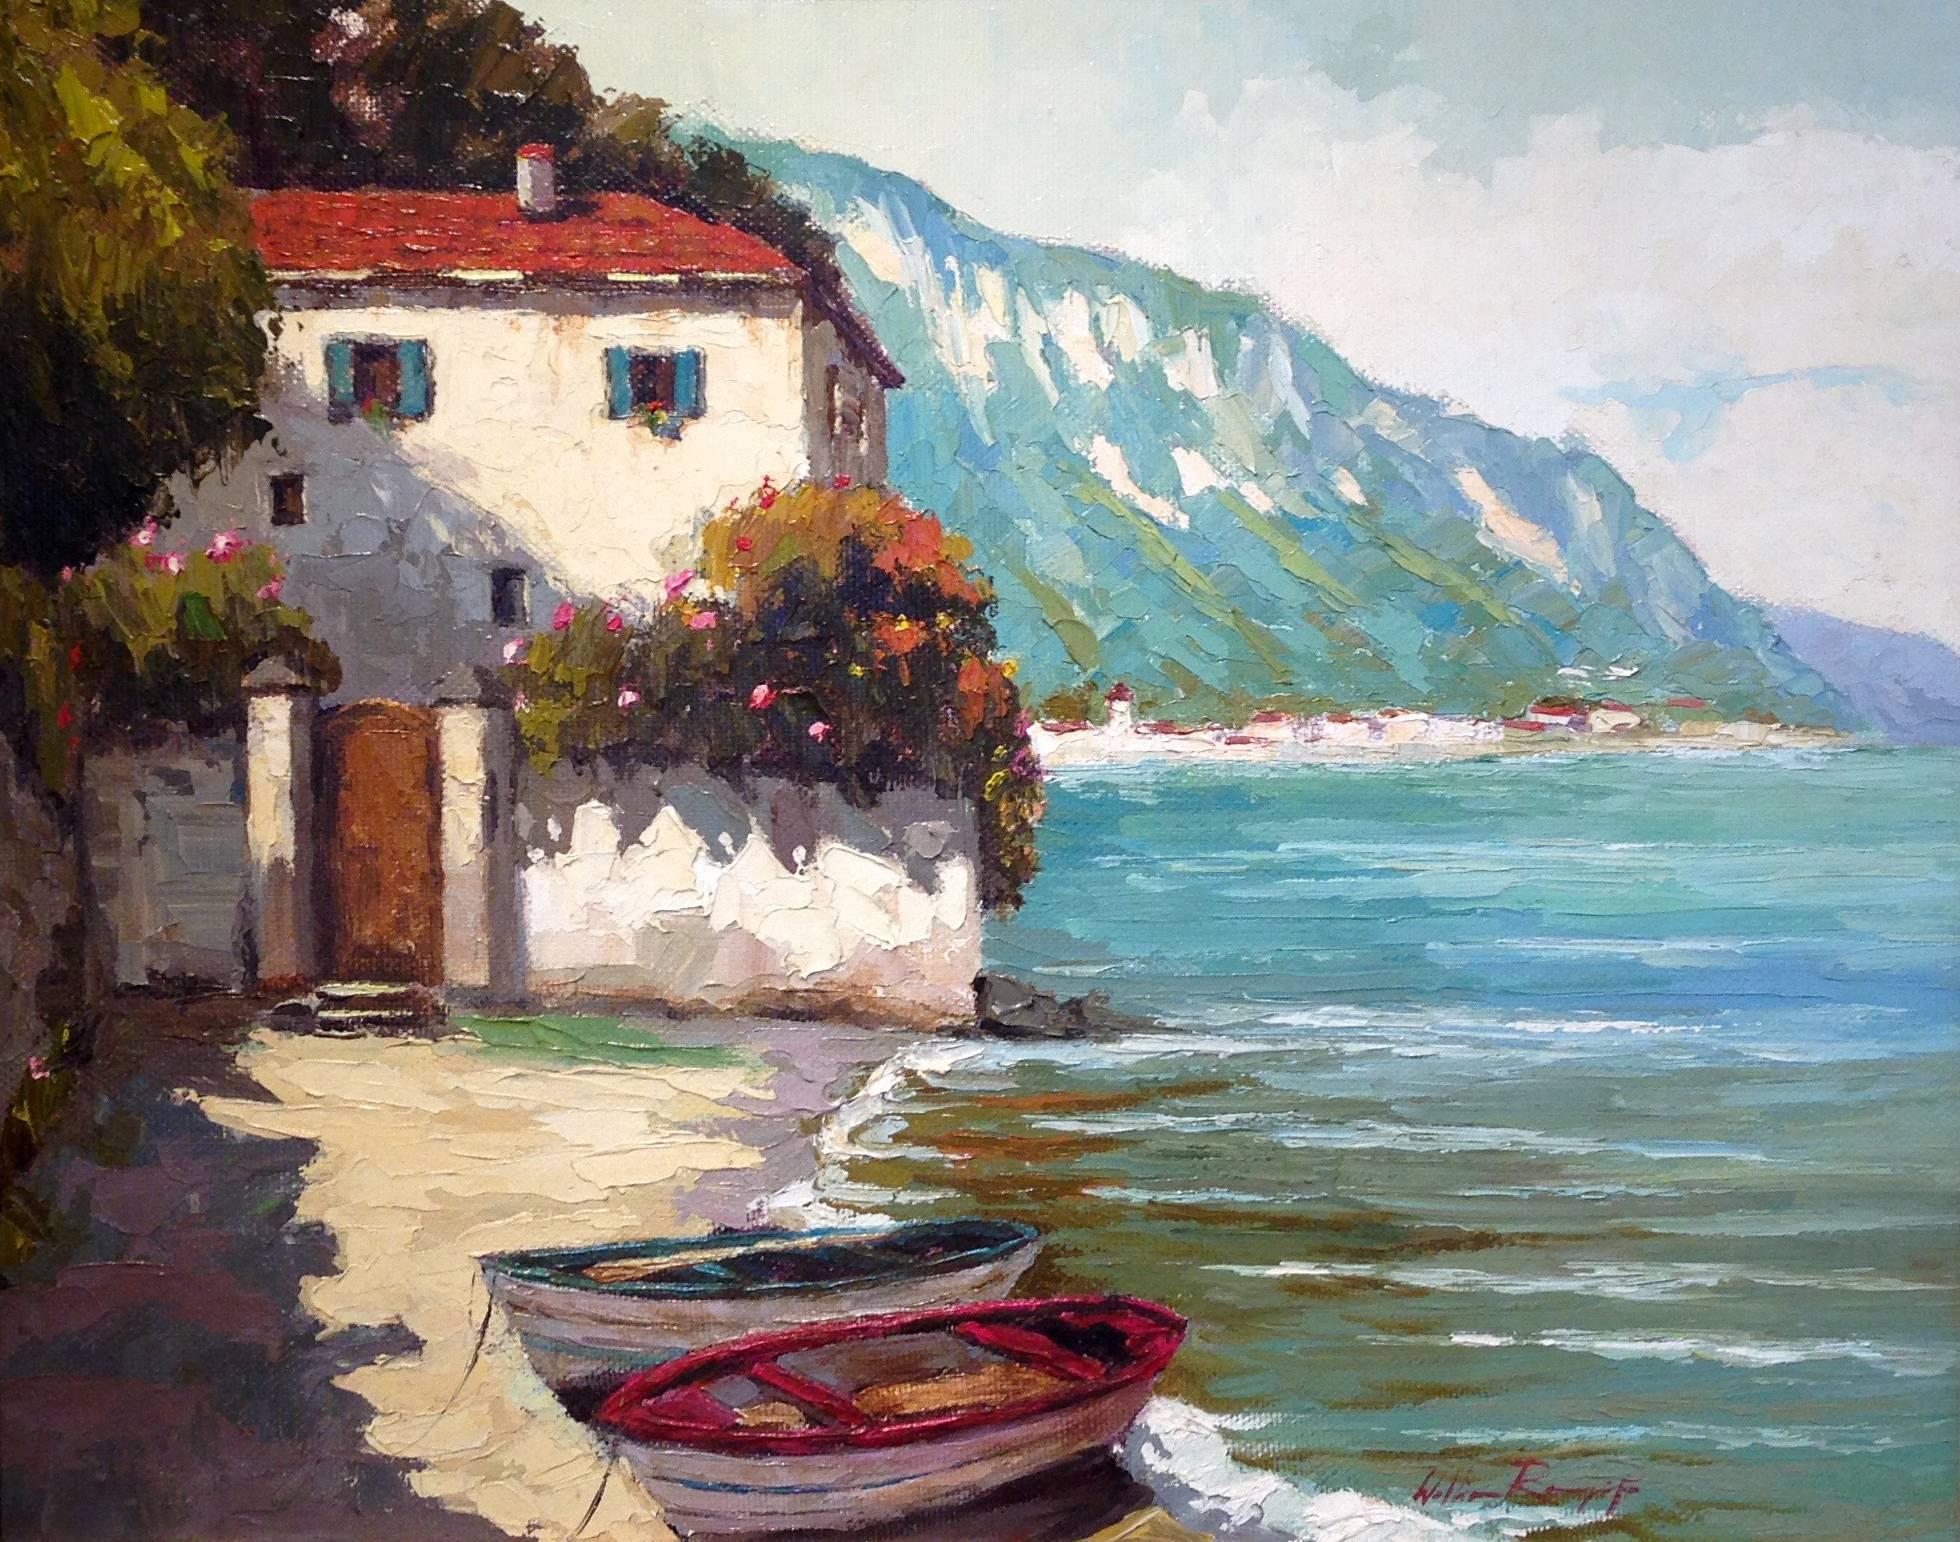 Villa and Boats at Tuscan Shore - Painting by William Rengifo